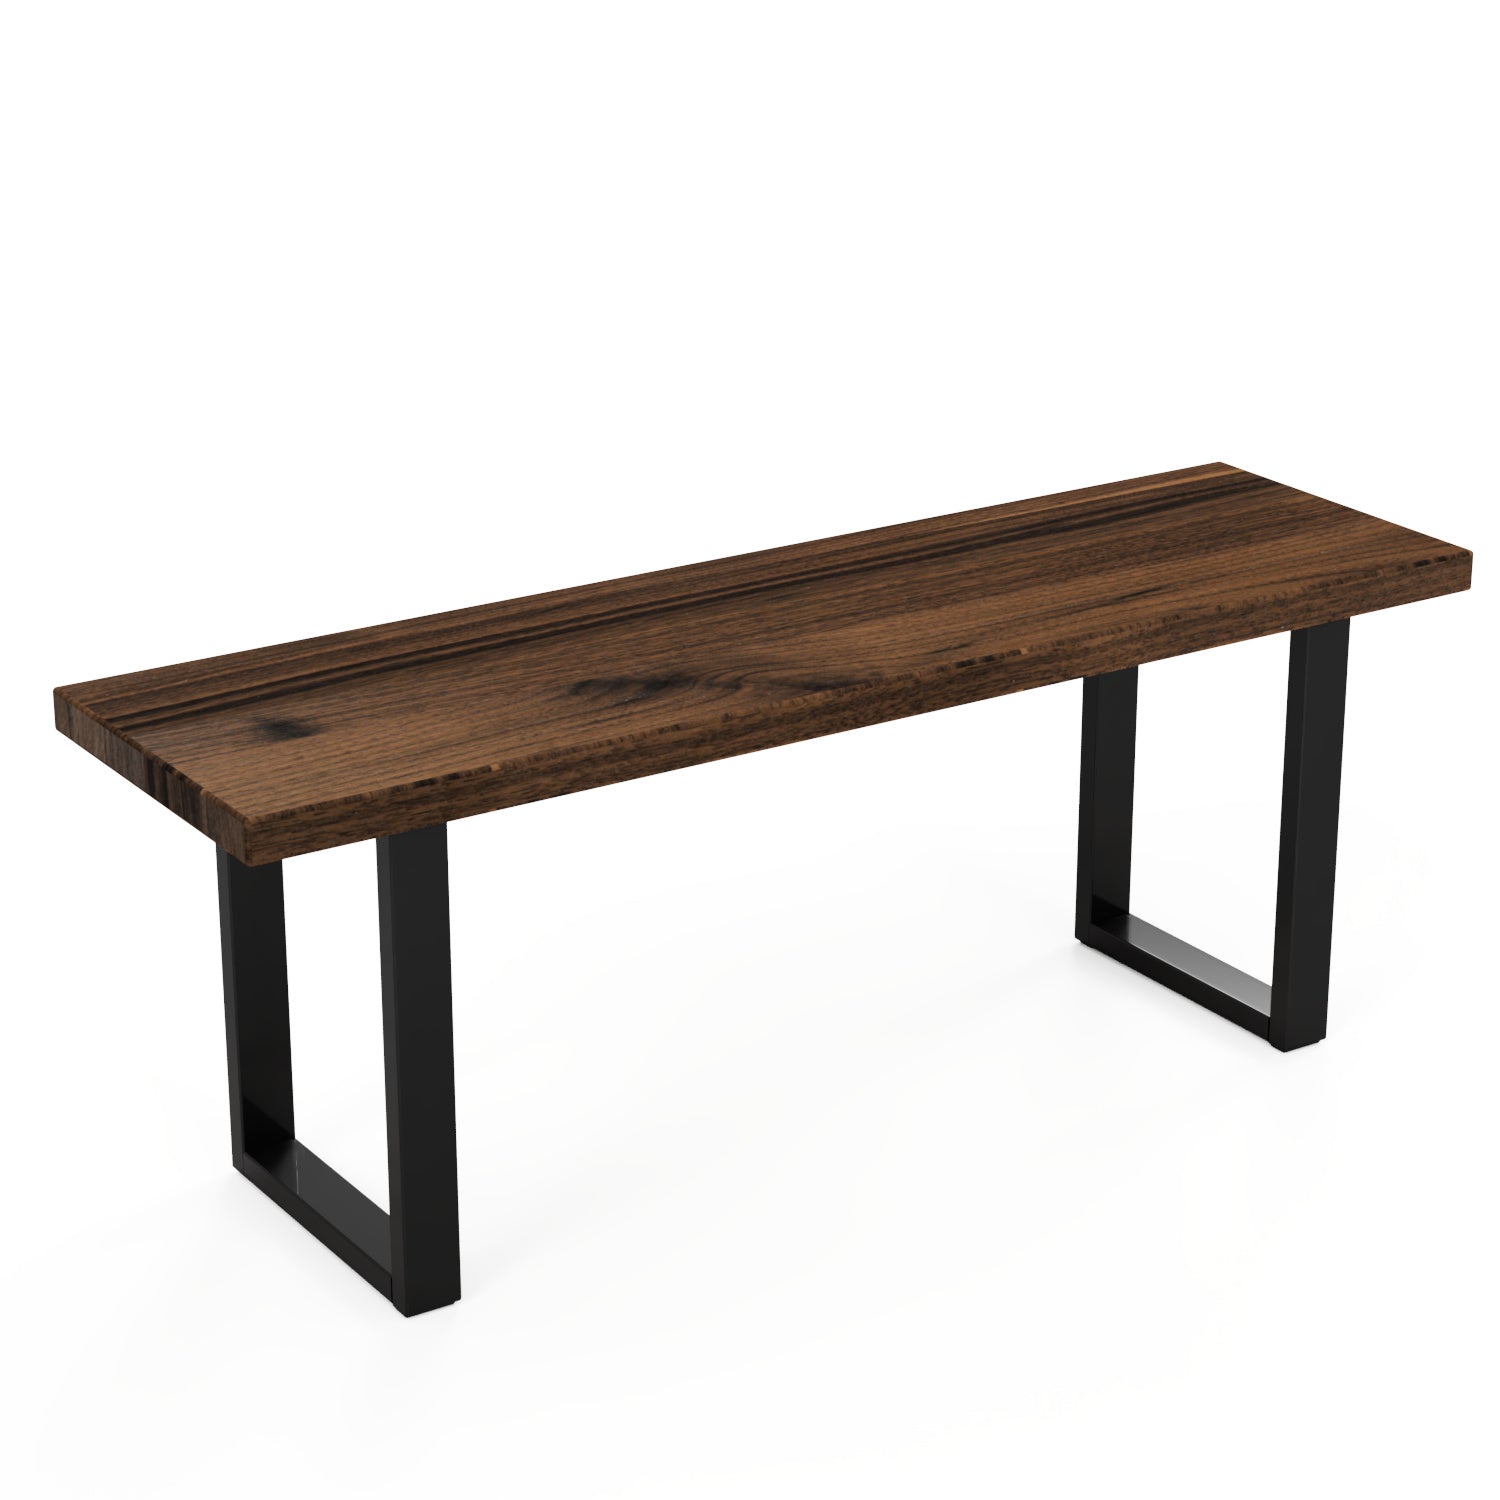 The Broadway Bench - FargoWoodworks